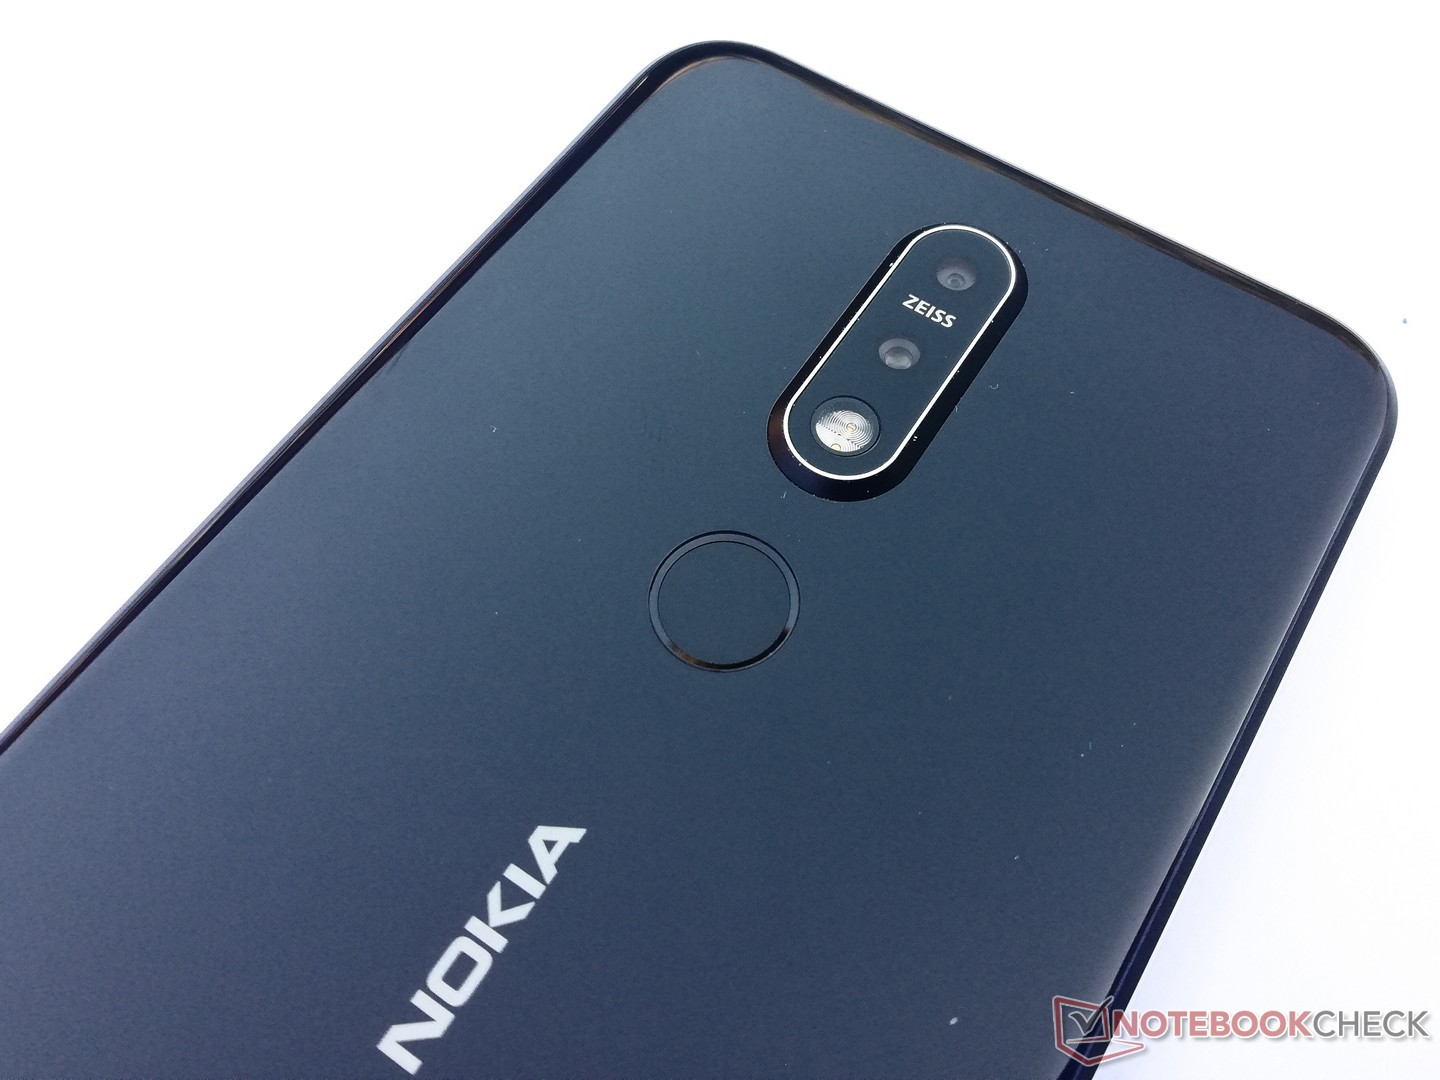 Tangle clumsy Perforate Nokia 7.1 Smartphone Review - NotebookCheck.net Reviews